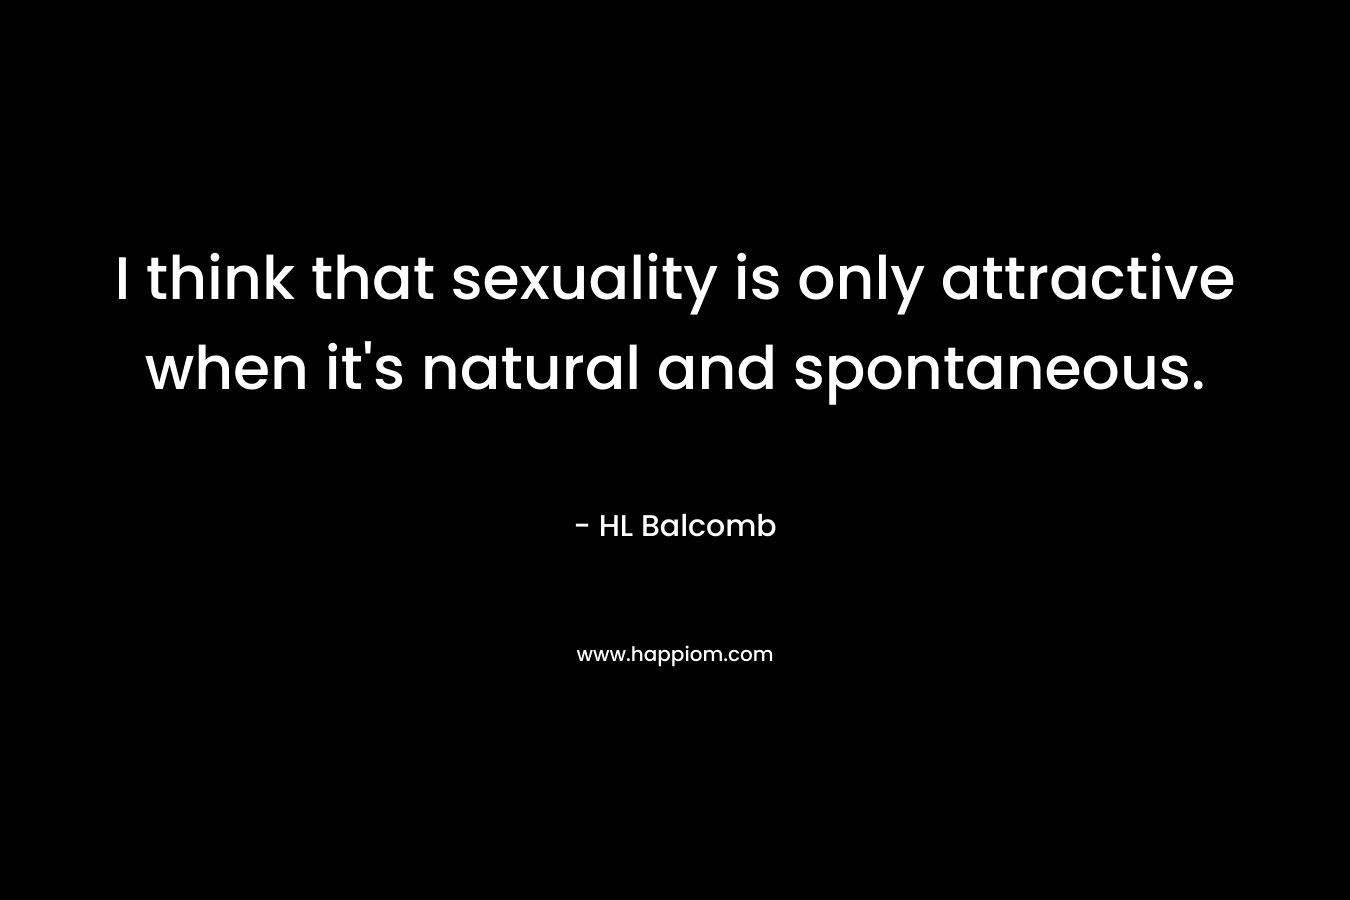 I think that sexuality is only attractive when it’s natural and spontaneous. – HL Balcomb